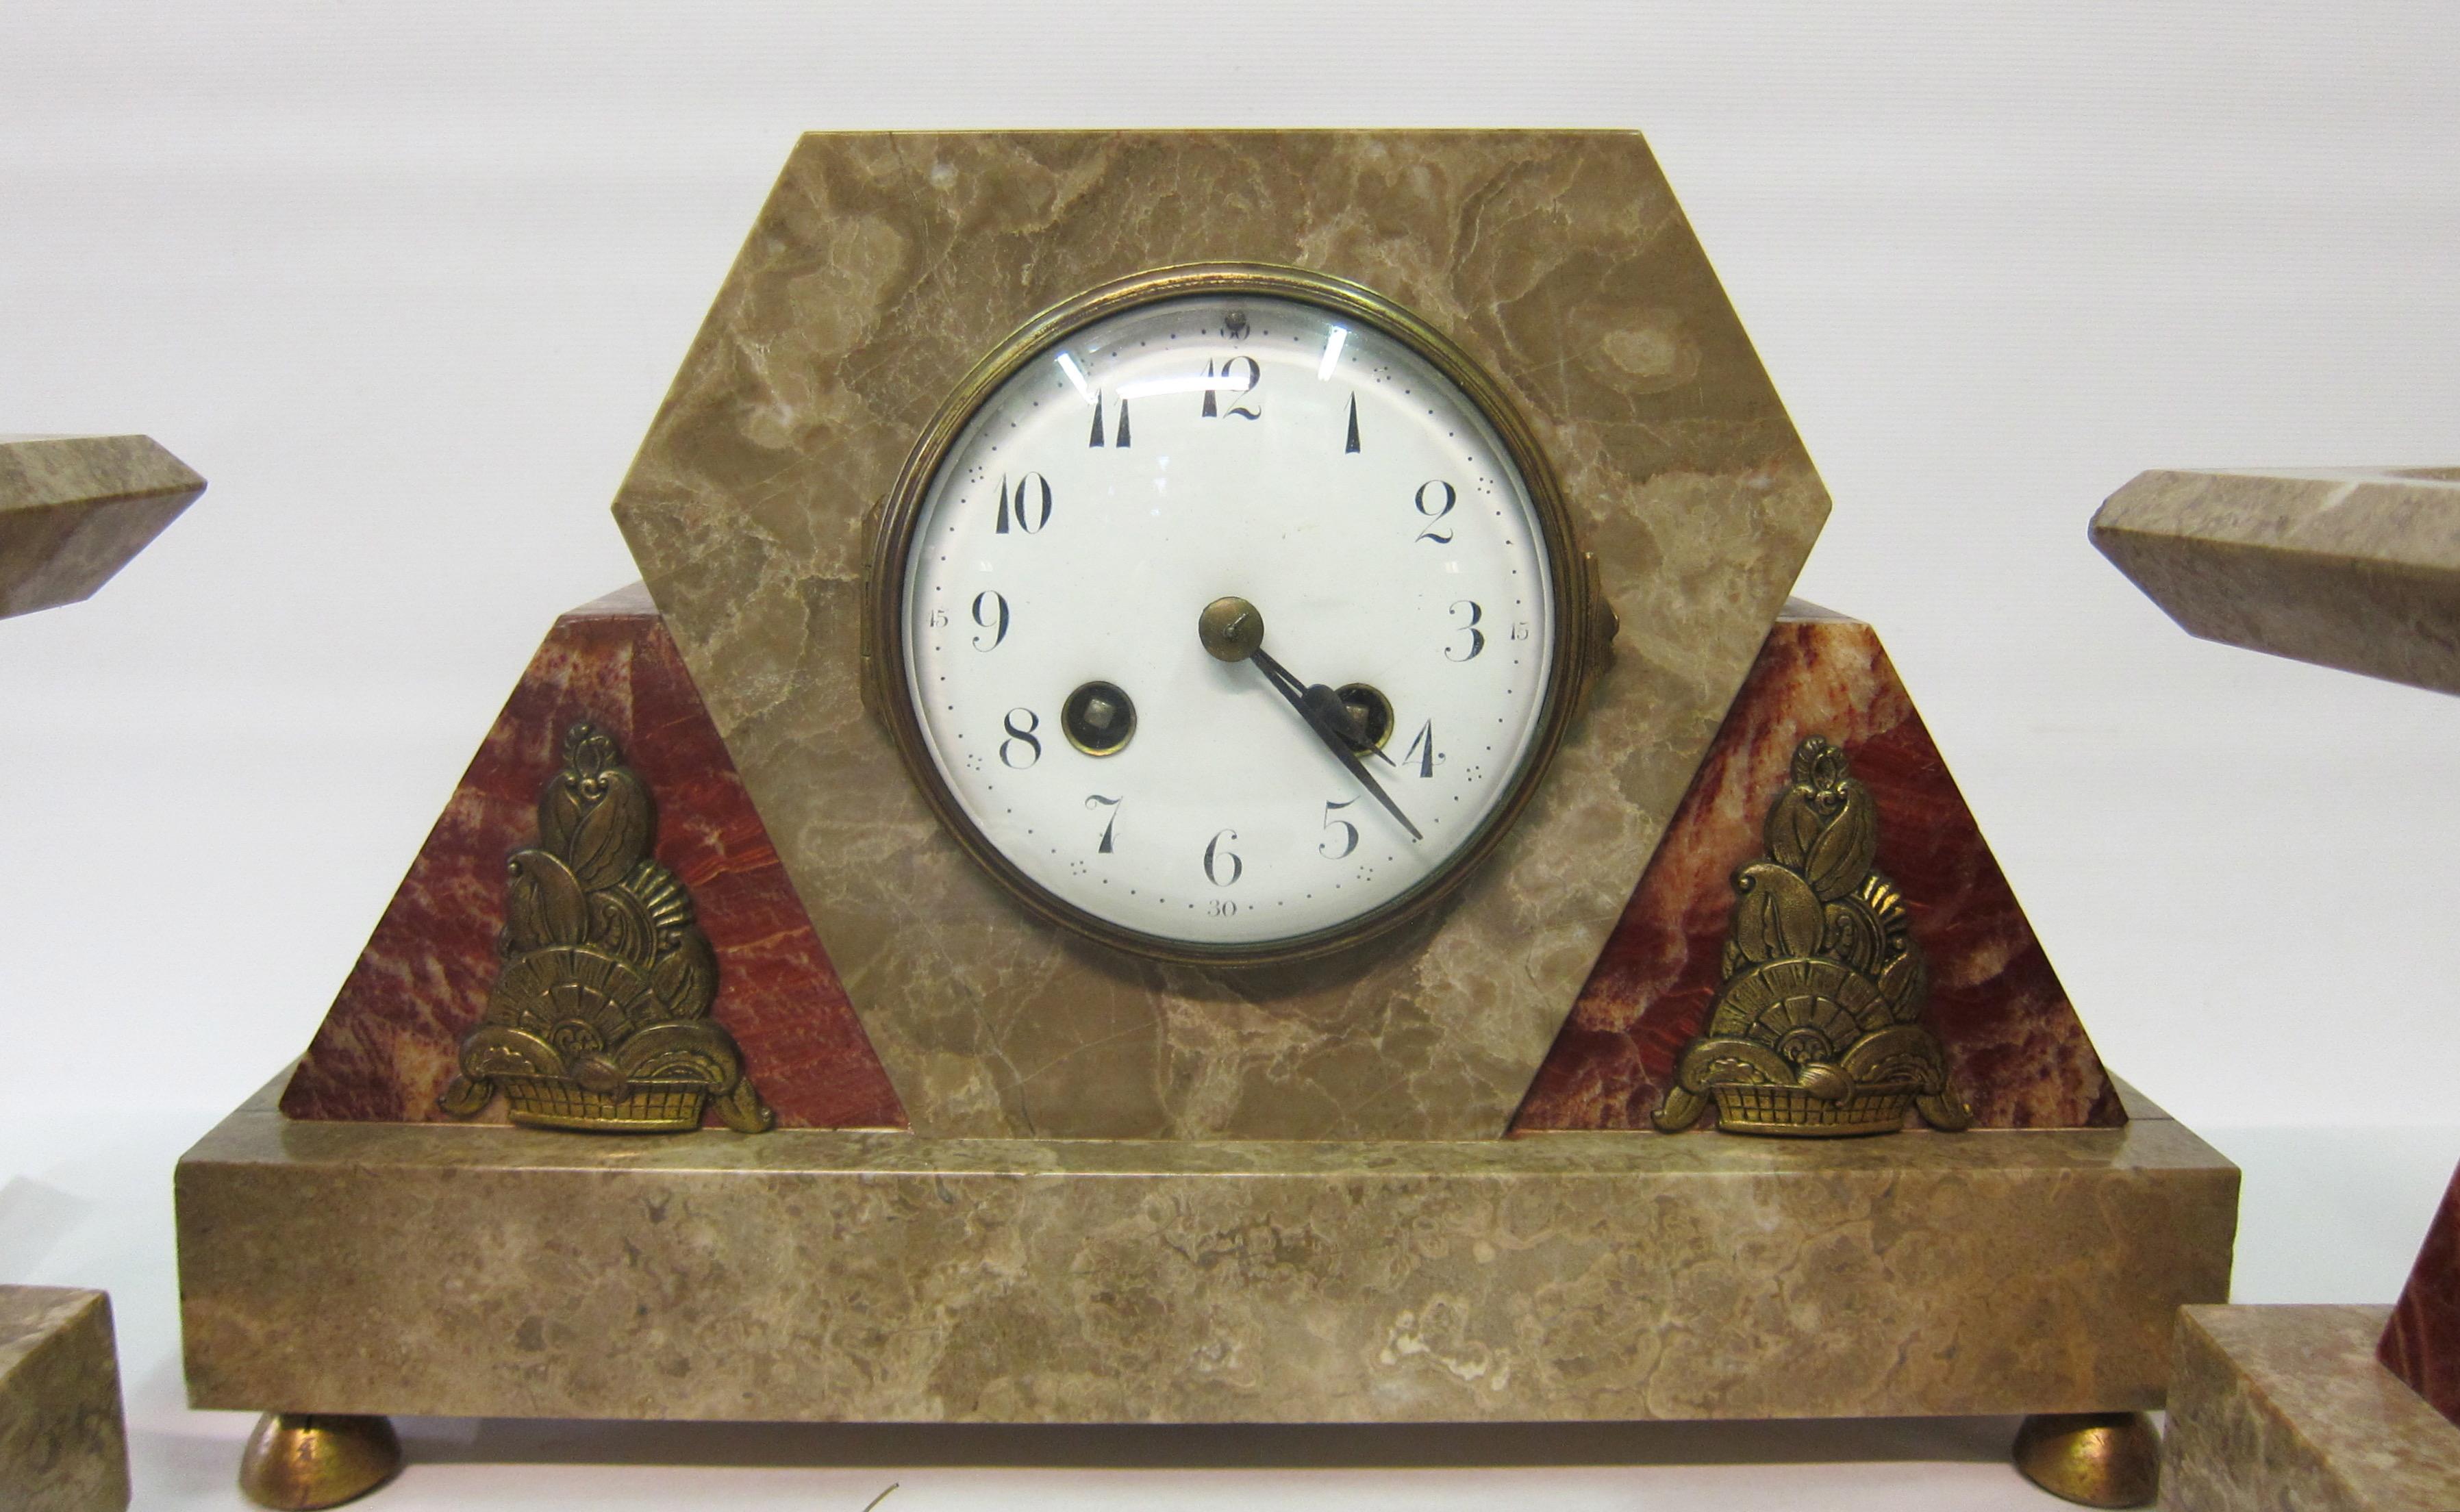 A vintage Art Deco clock set, circa 1930. The clock and matching accessories are accented with detailed bronze decorations that are mounted on triangular rouge marble shapes. This rouge marble together with contrasting sandalwood color marble forms